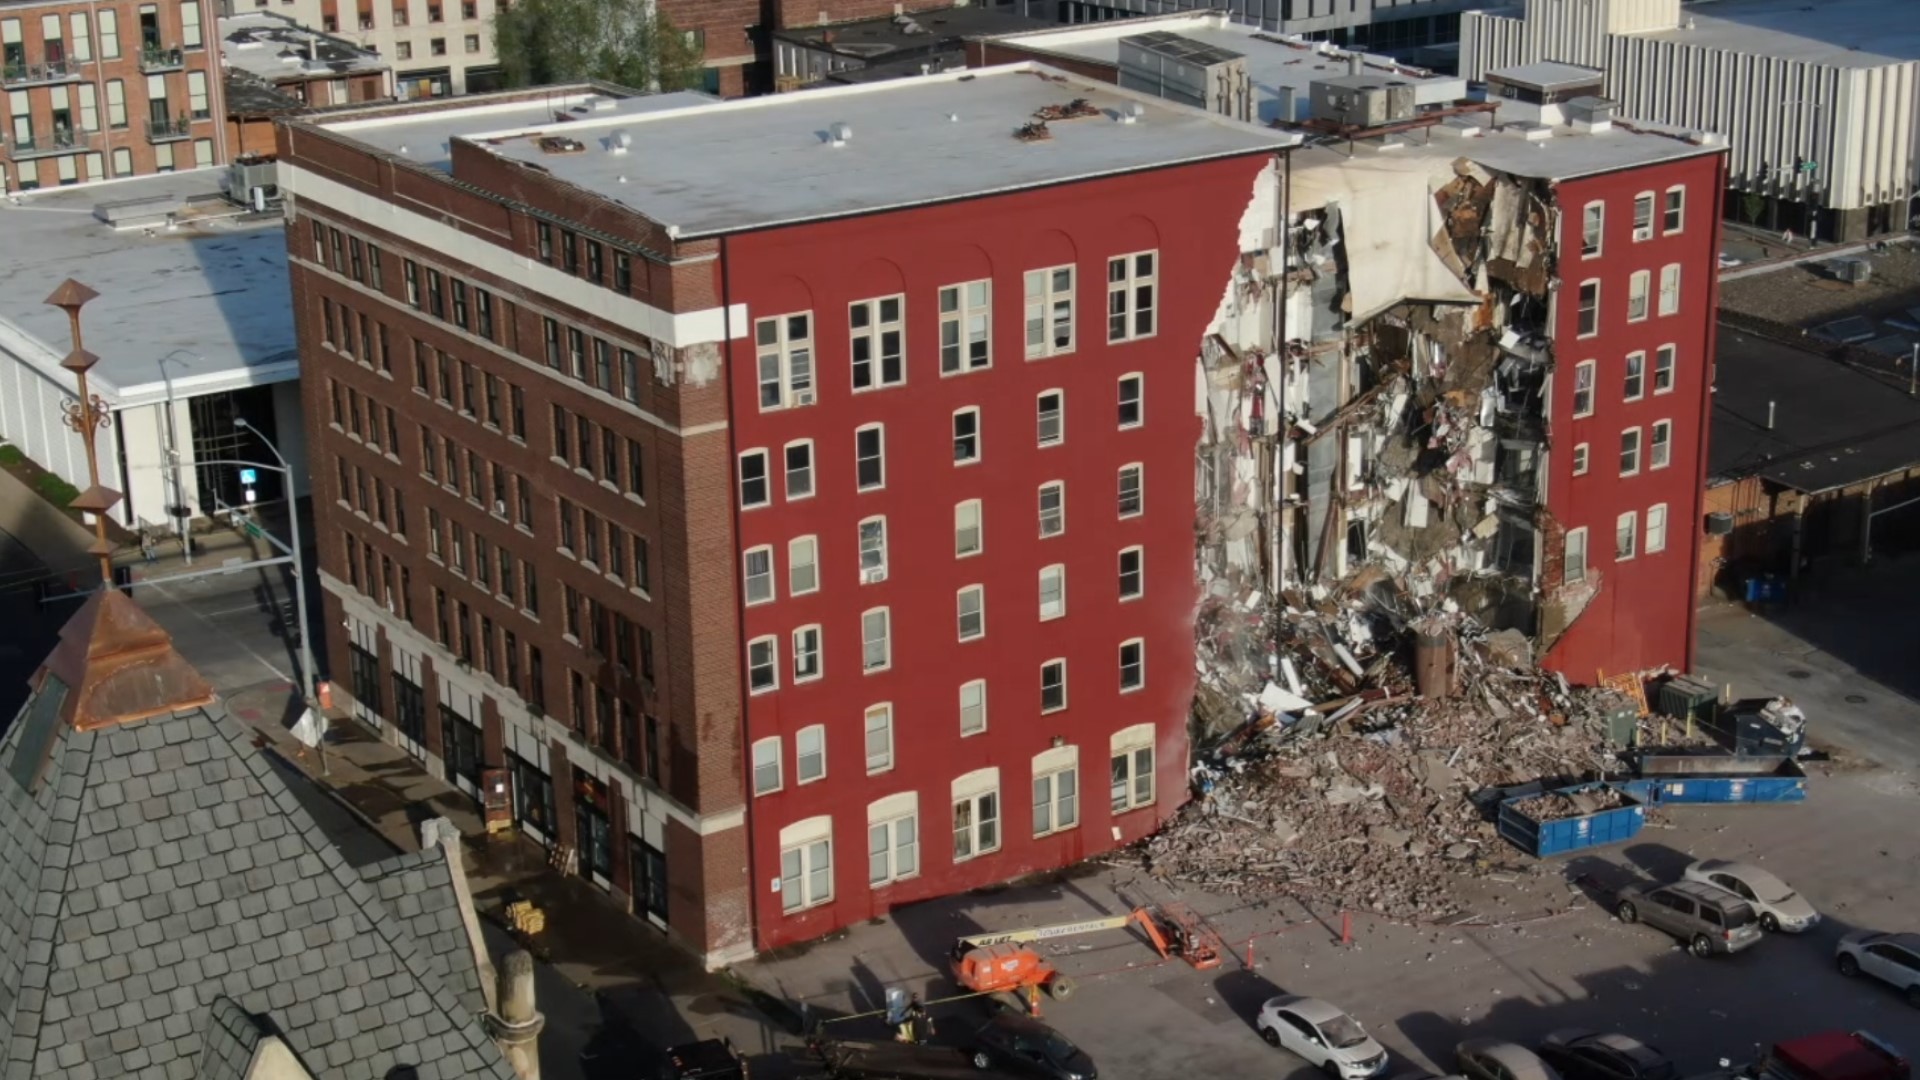 The City fined Andrew Wold for failing to maintain the building in a "safe, sanitary, and structurally sound condition," citing the collapse on Sunday evening.